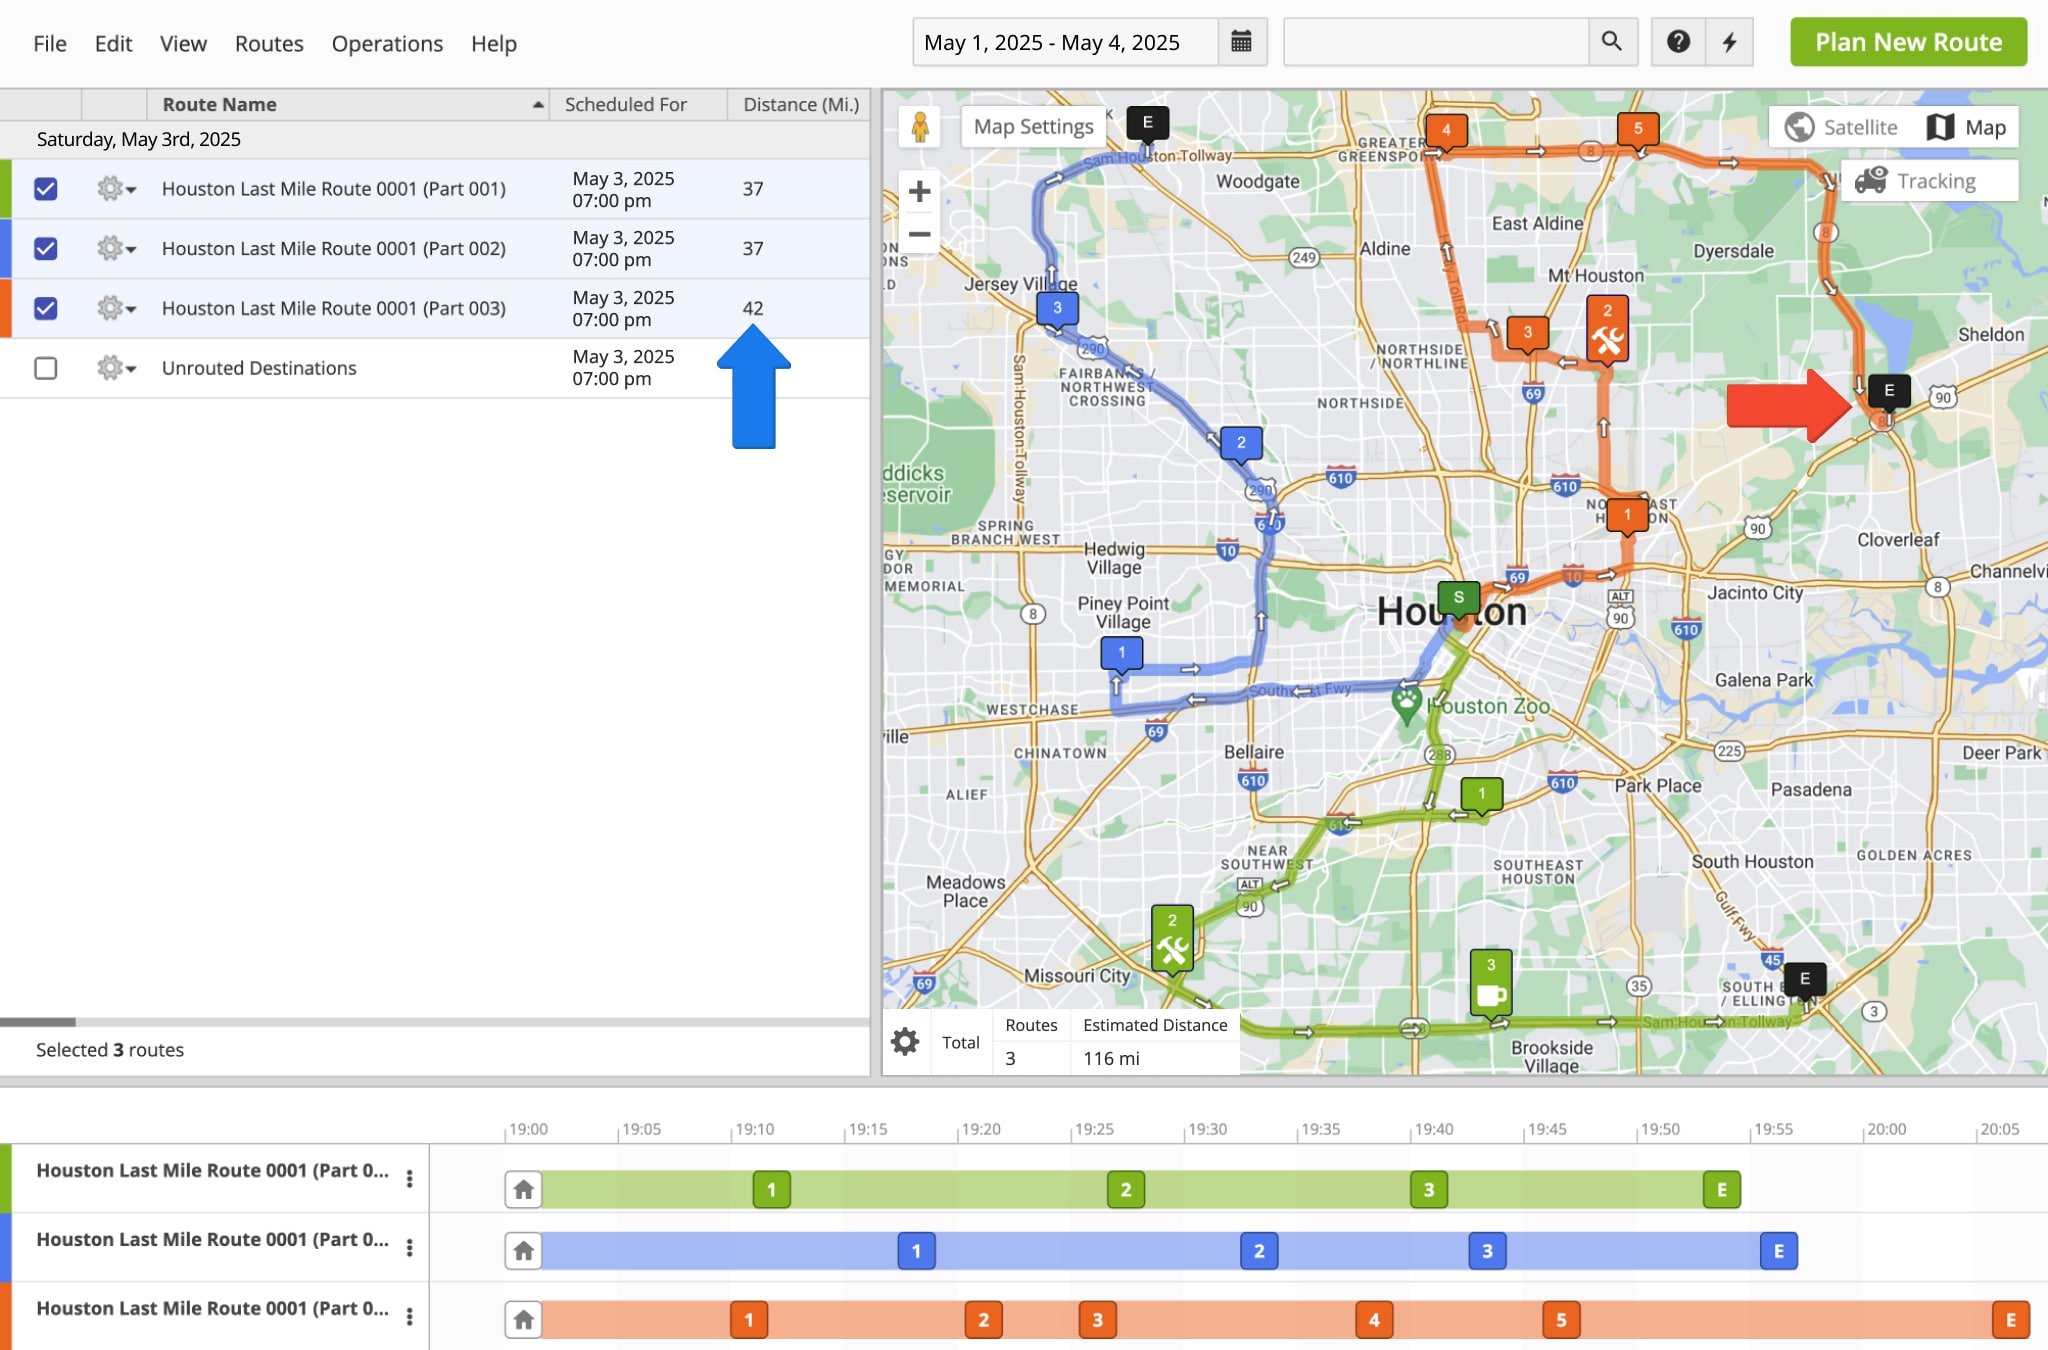 Addin unrouted destinations to routes may lead to those routes exceeding your constraint settings.